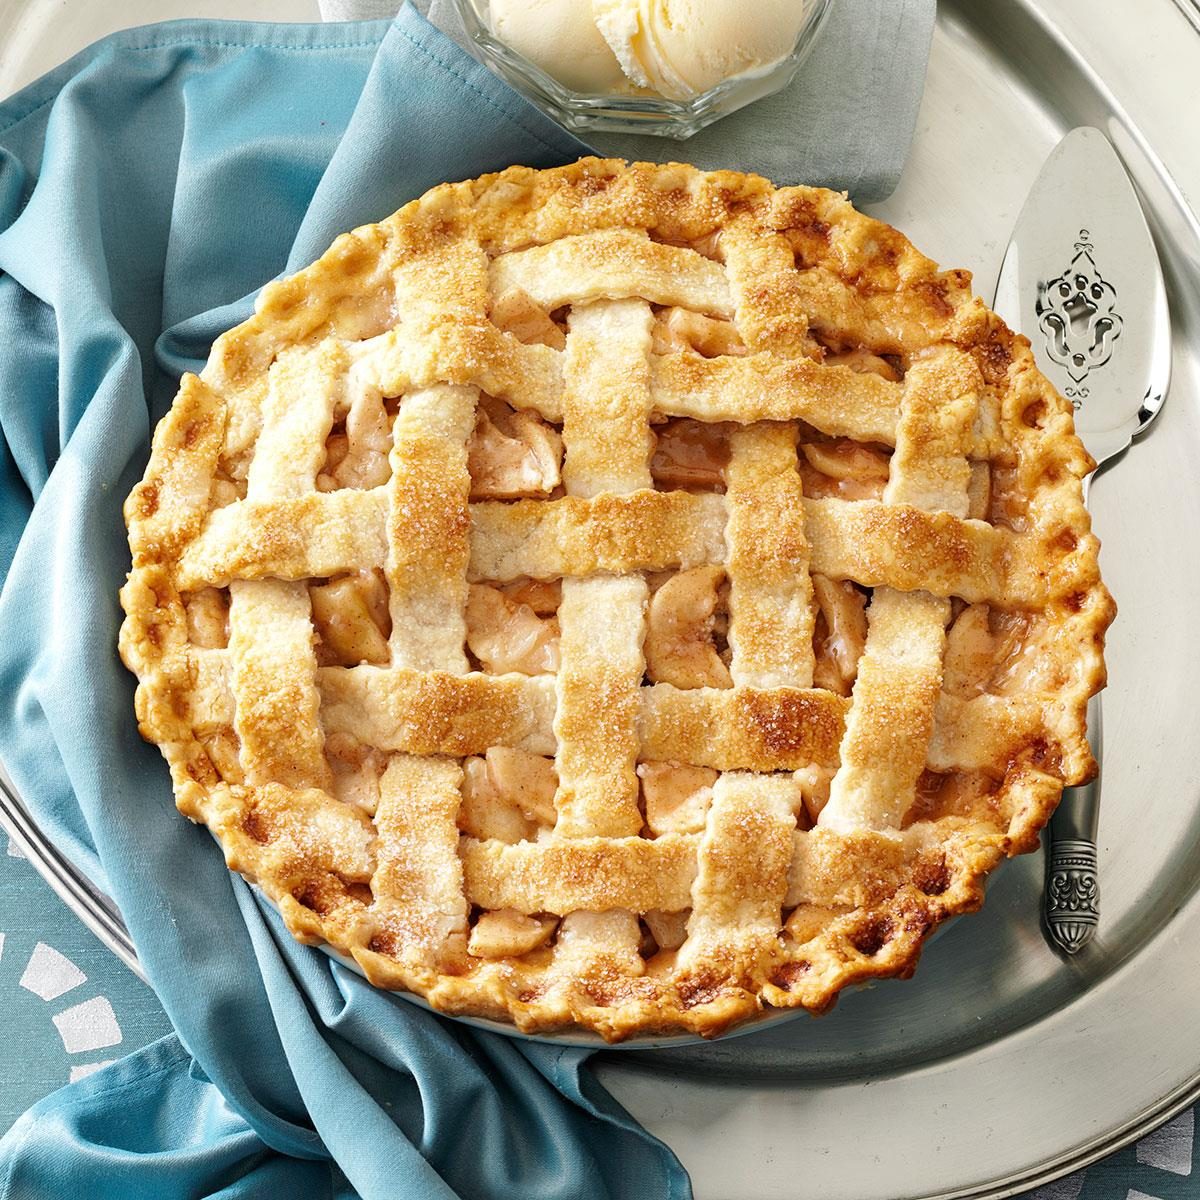 Lattice-Topped Apple Pie Recipe: How to Make It | Taste of Home